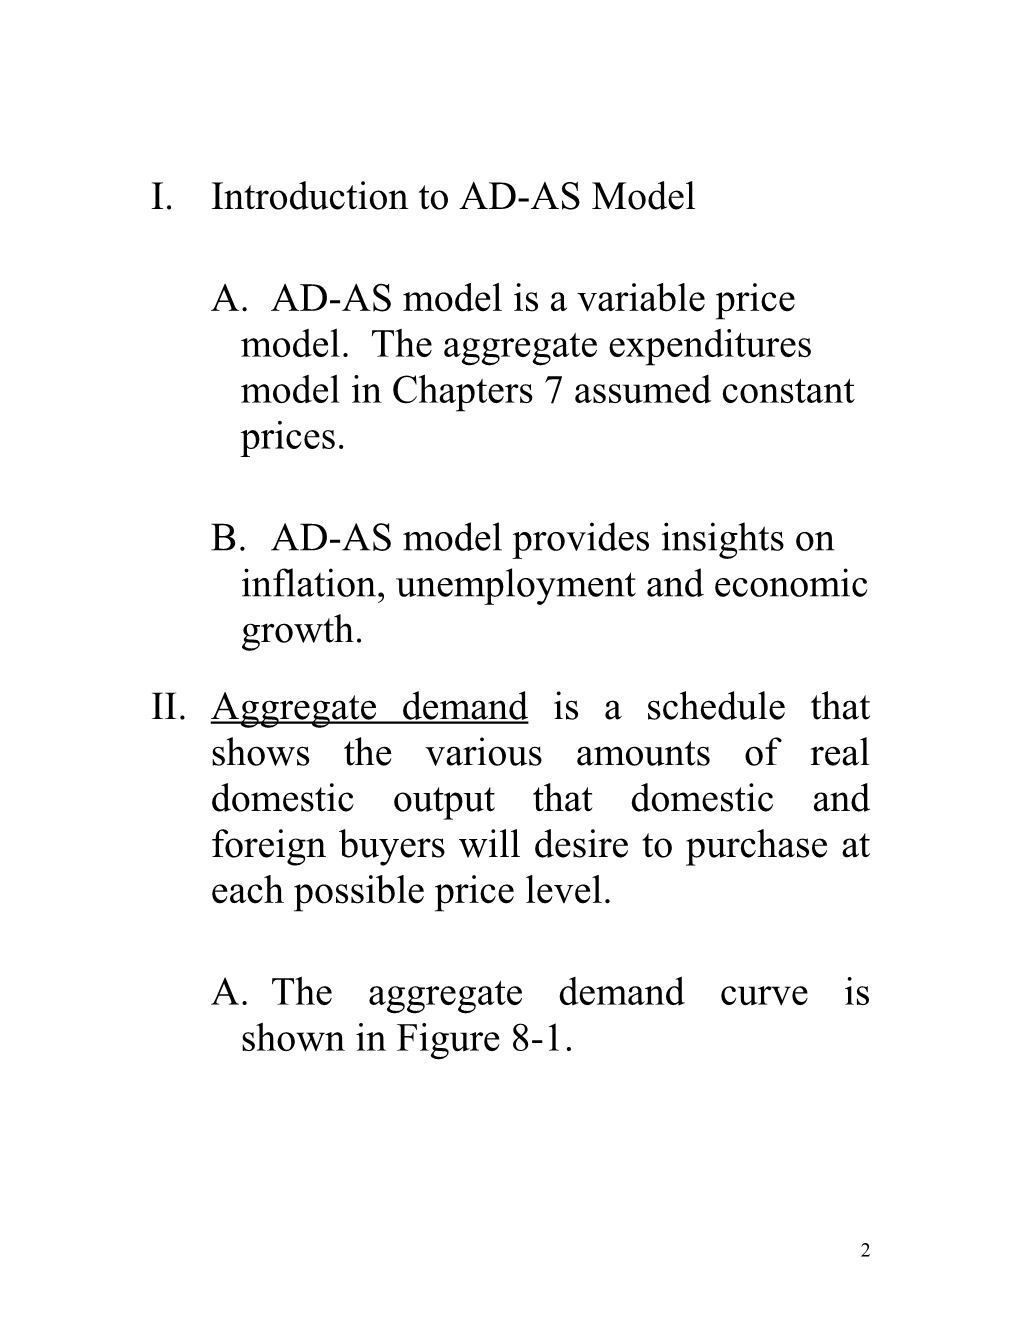 The Ad-As Model